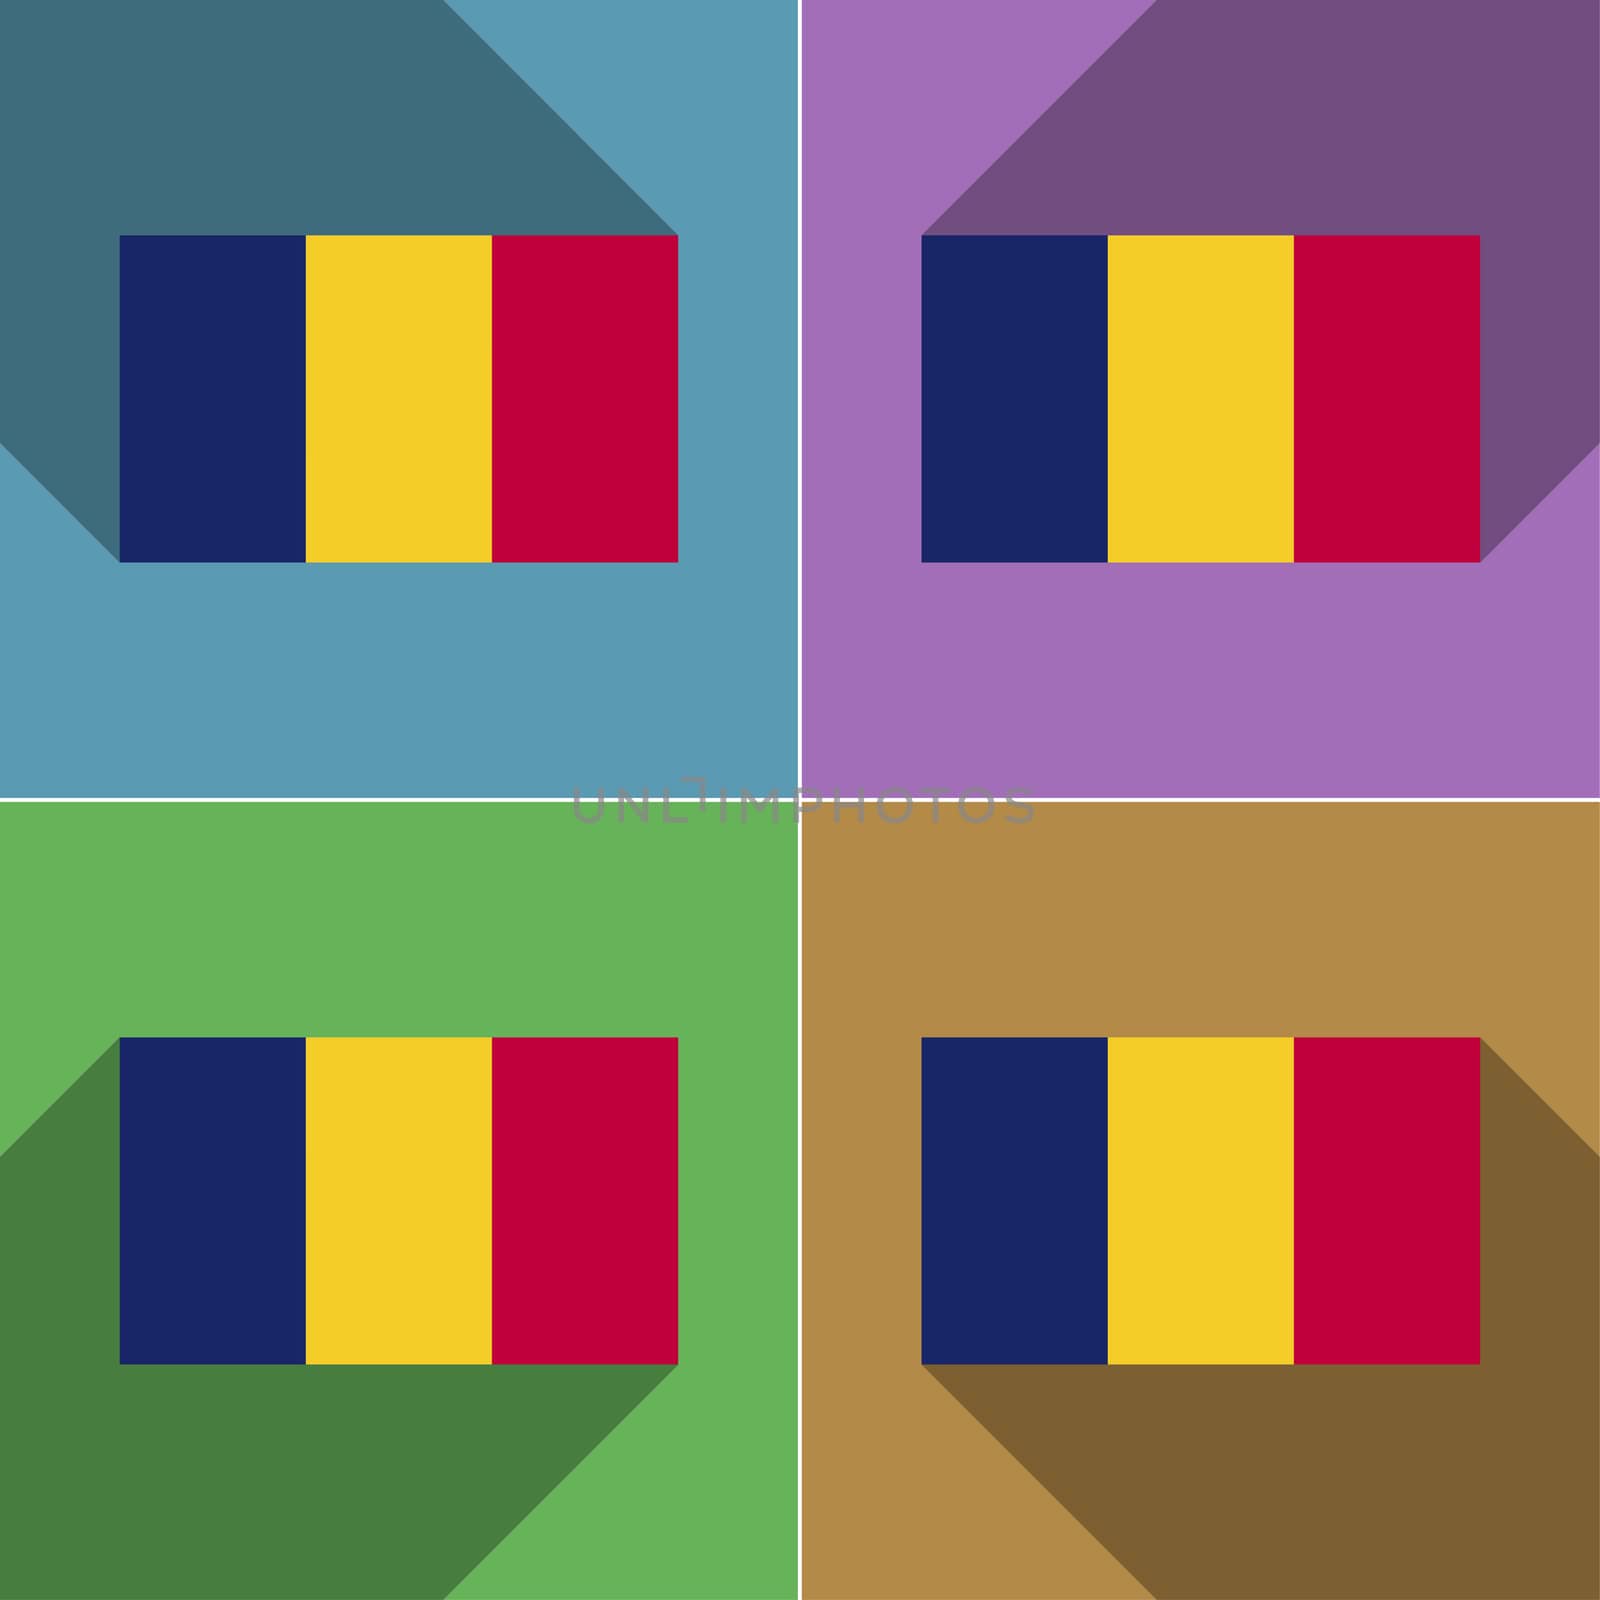 Flags of Chad. Set of colors flat design and long shadows.  illustration